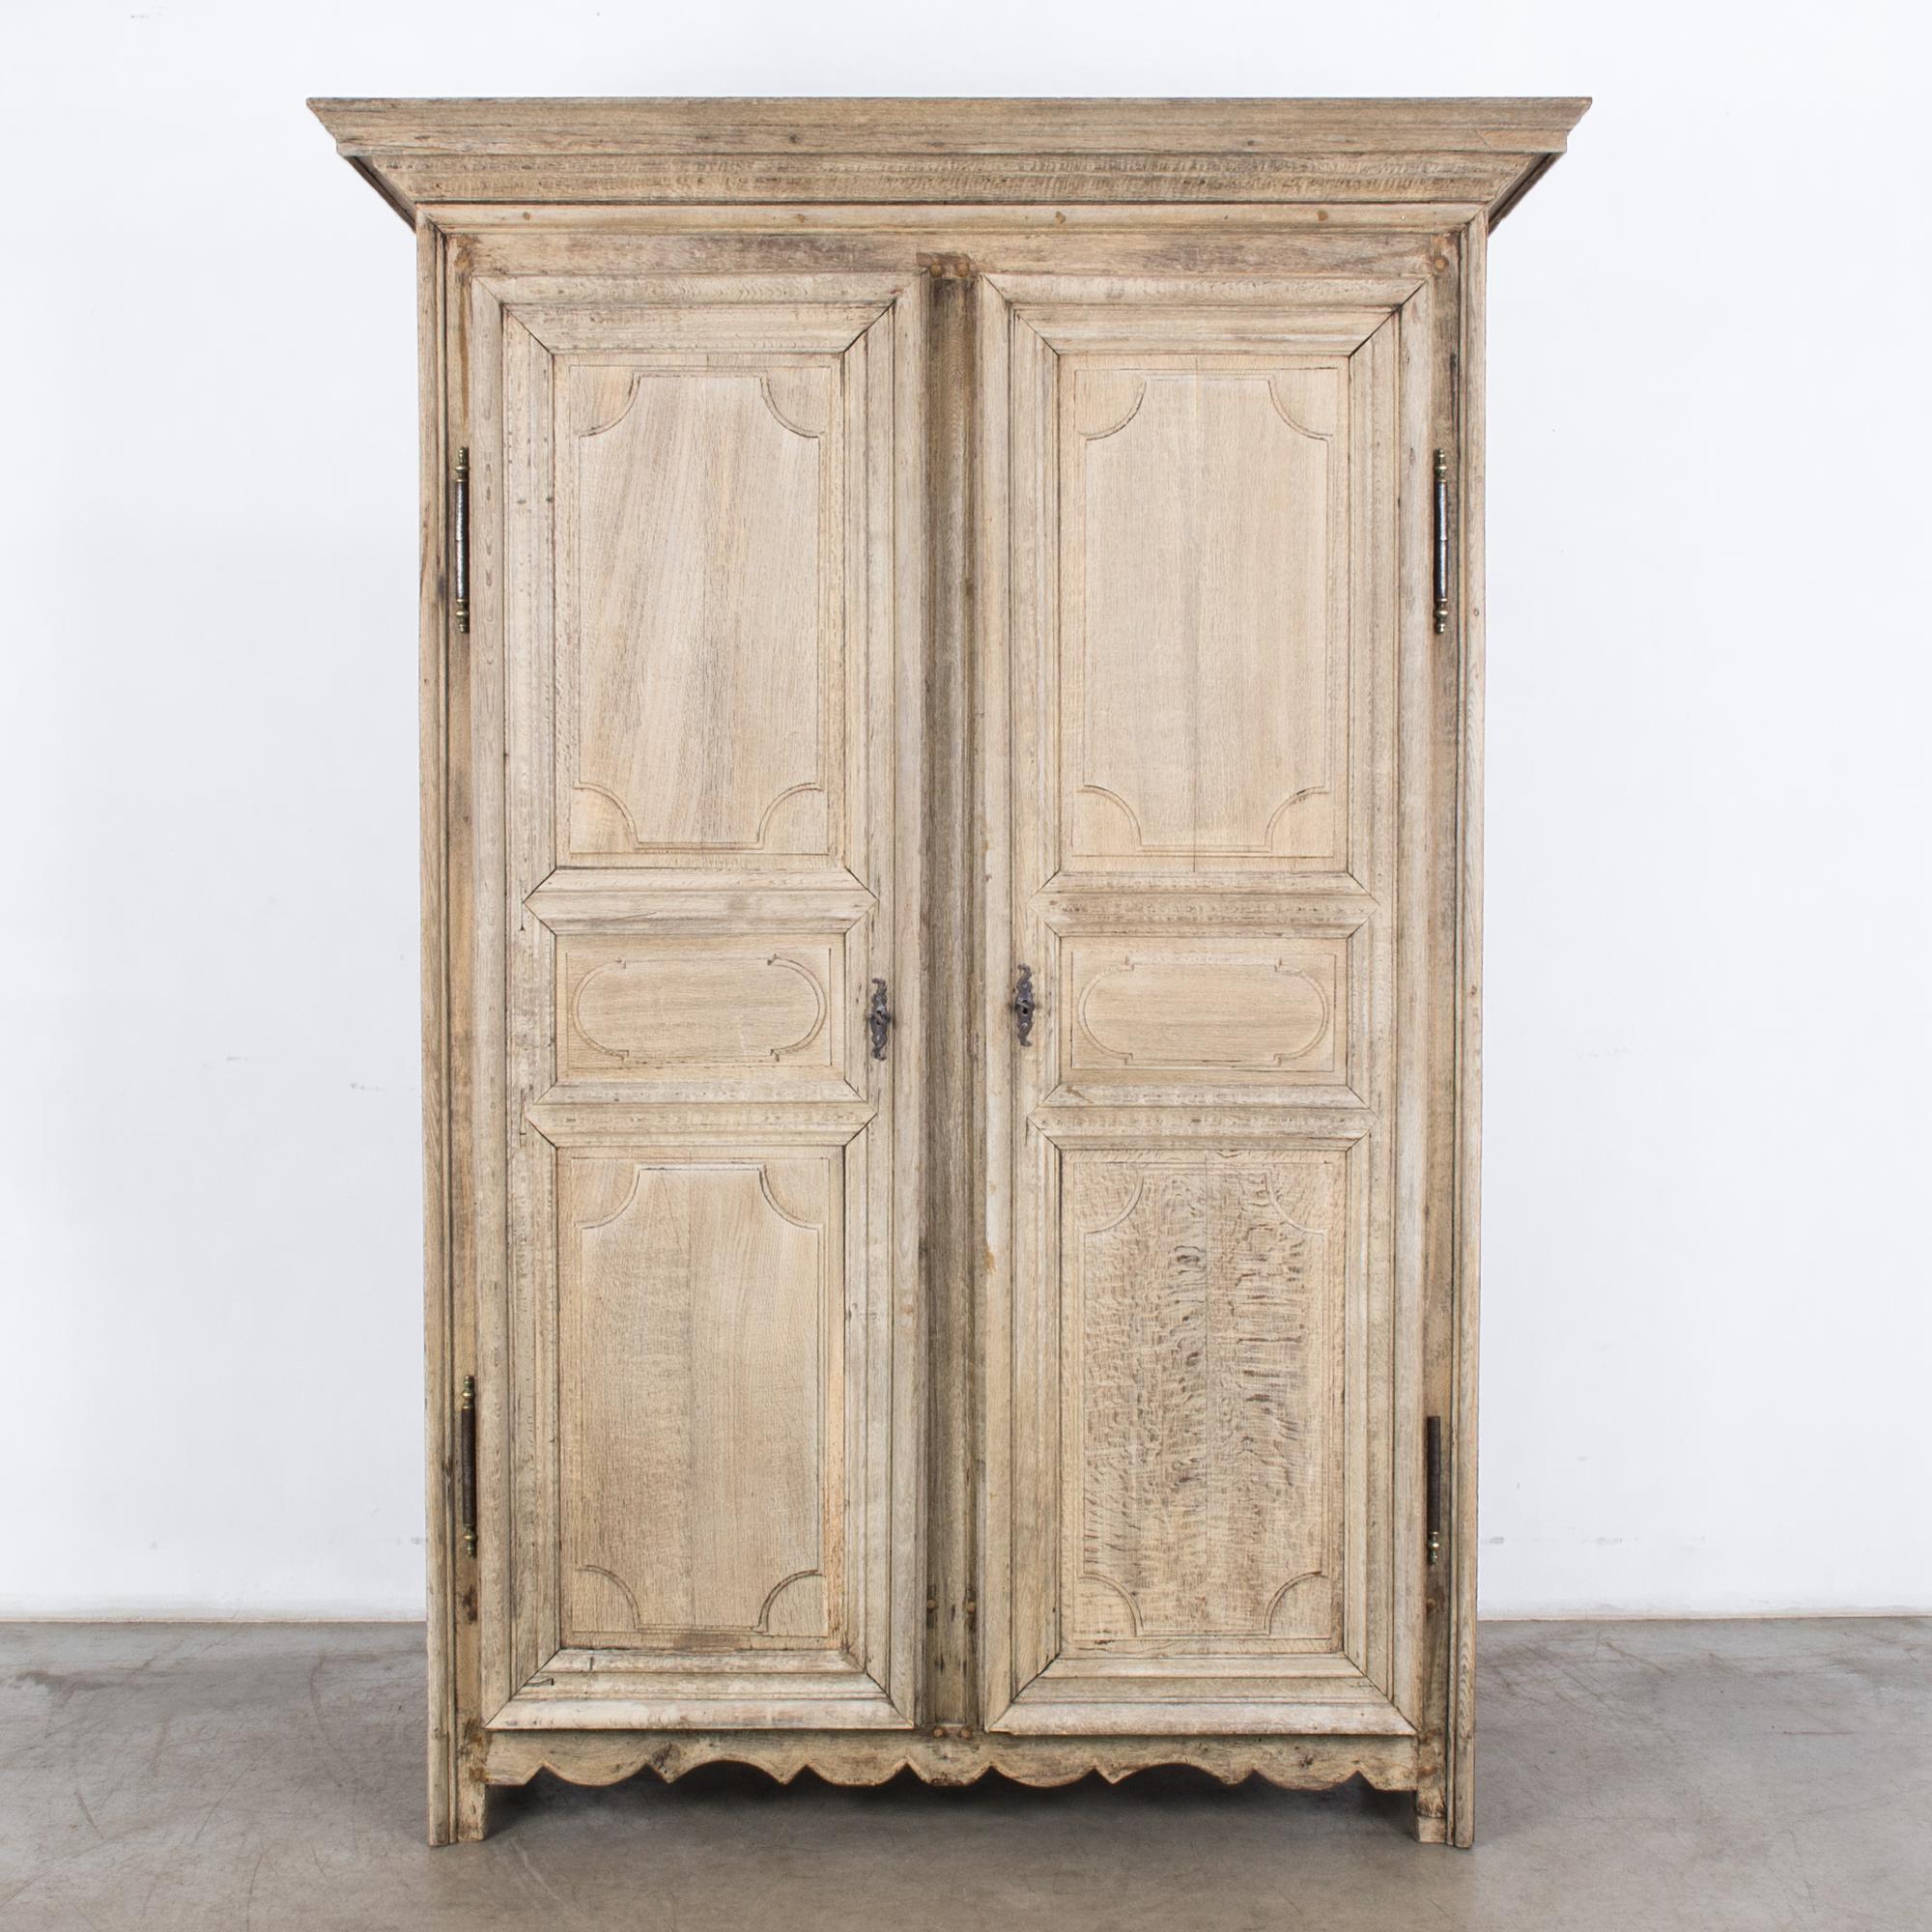 A bleached oak armoire from France, circa 1800. Paneled doors open into two interior shelves and a pair of lower drawers with golden handles. The wood has been restored to a bleached oak finish, highlighting the texture of the grain. The scalloped